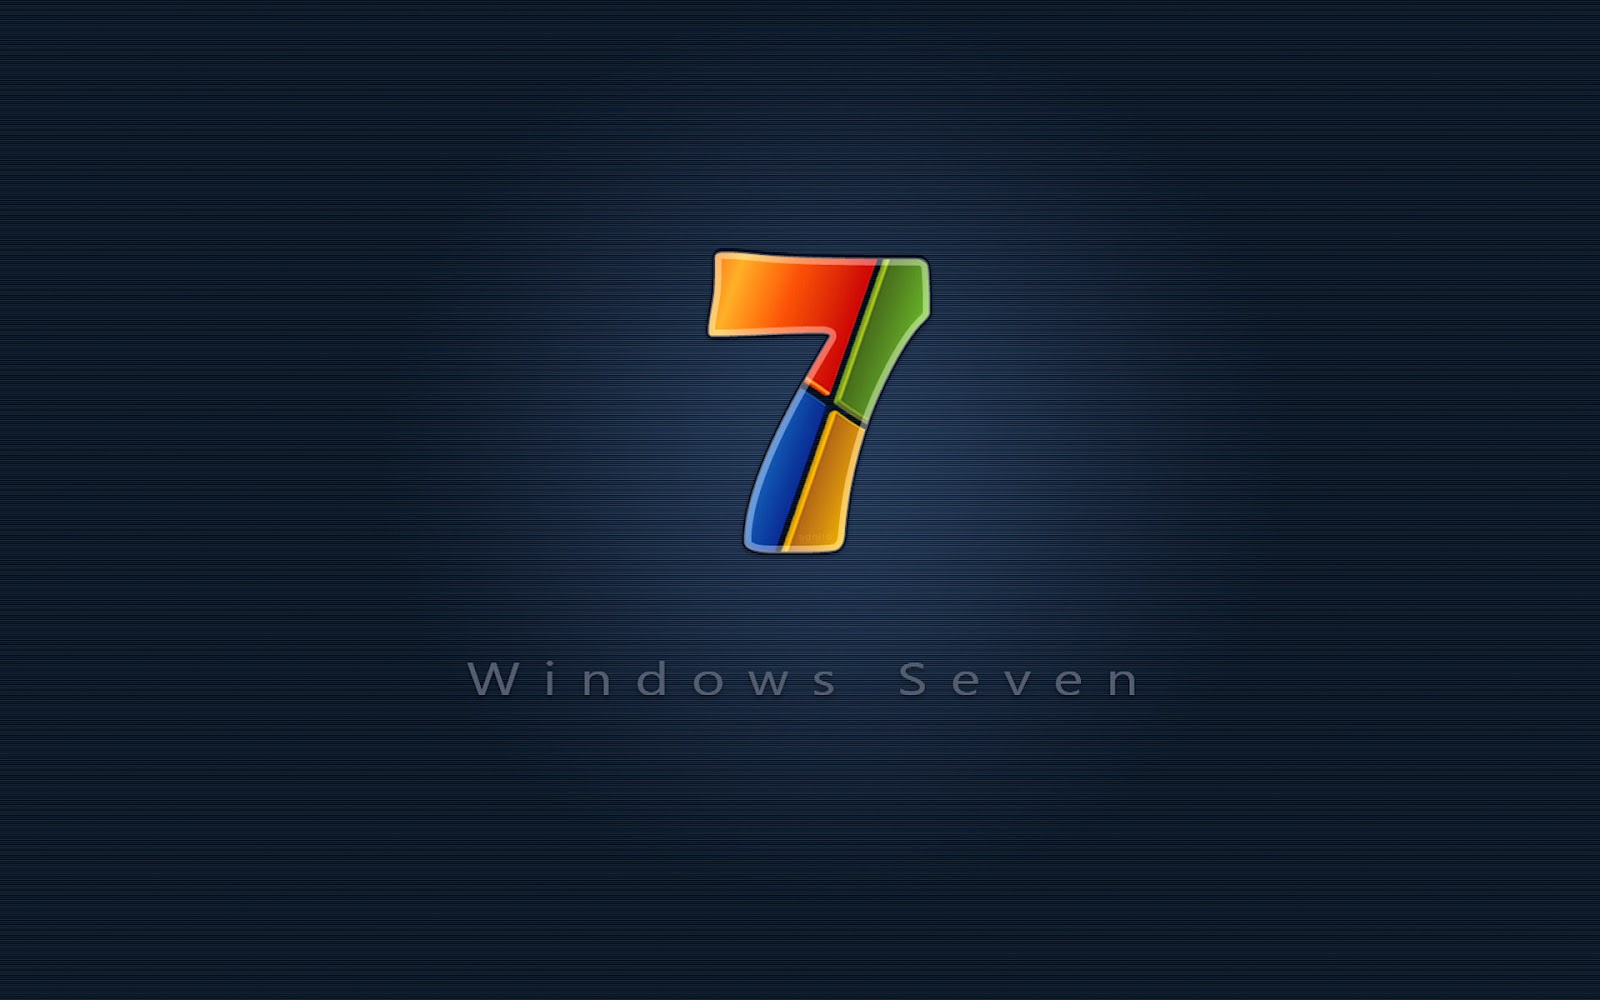 ... Wallpapers, Videos: Windows 7 Wallpapers hd free, Windows Wallpapers